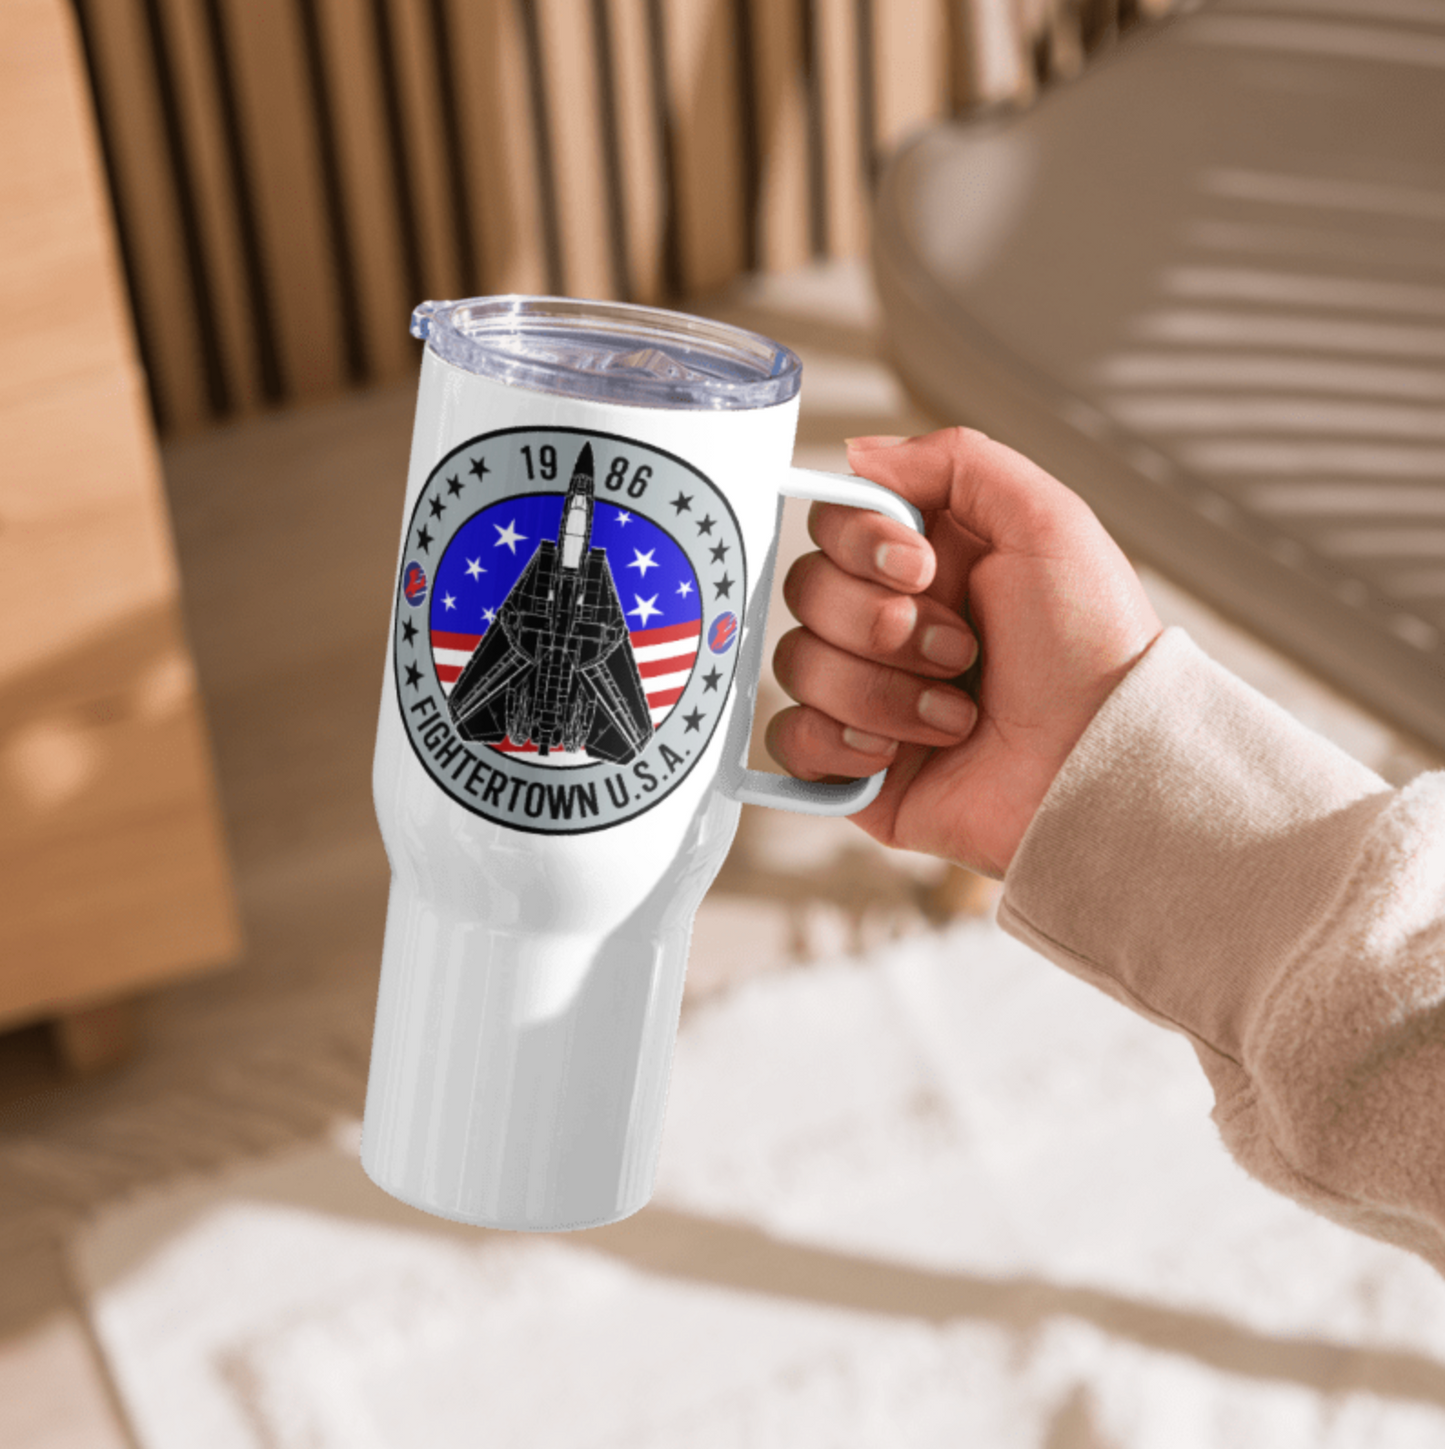 F-14 Tomcat Fightertown Travel mug with a handle